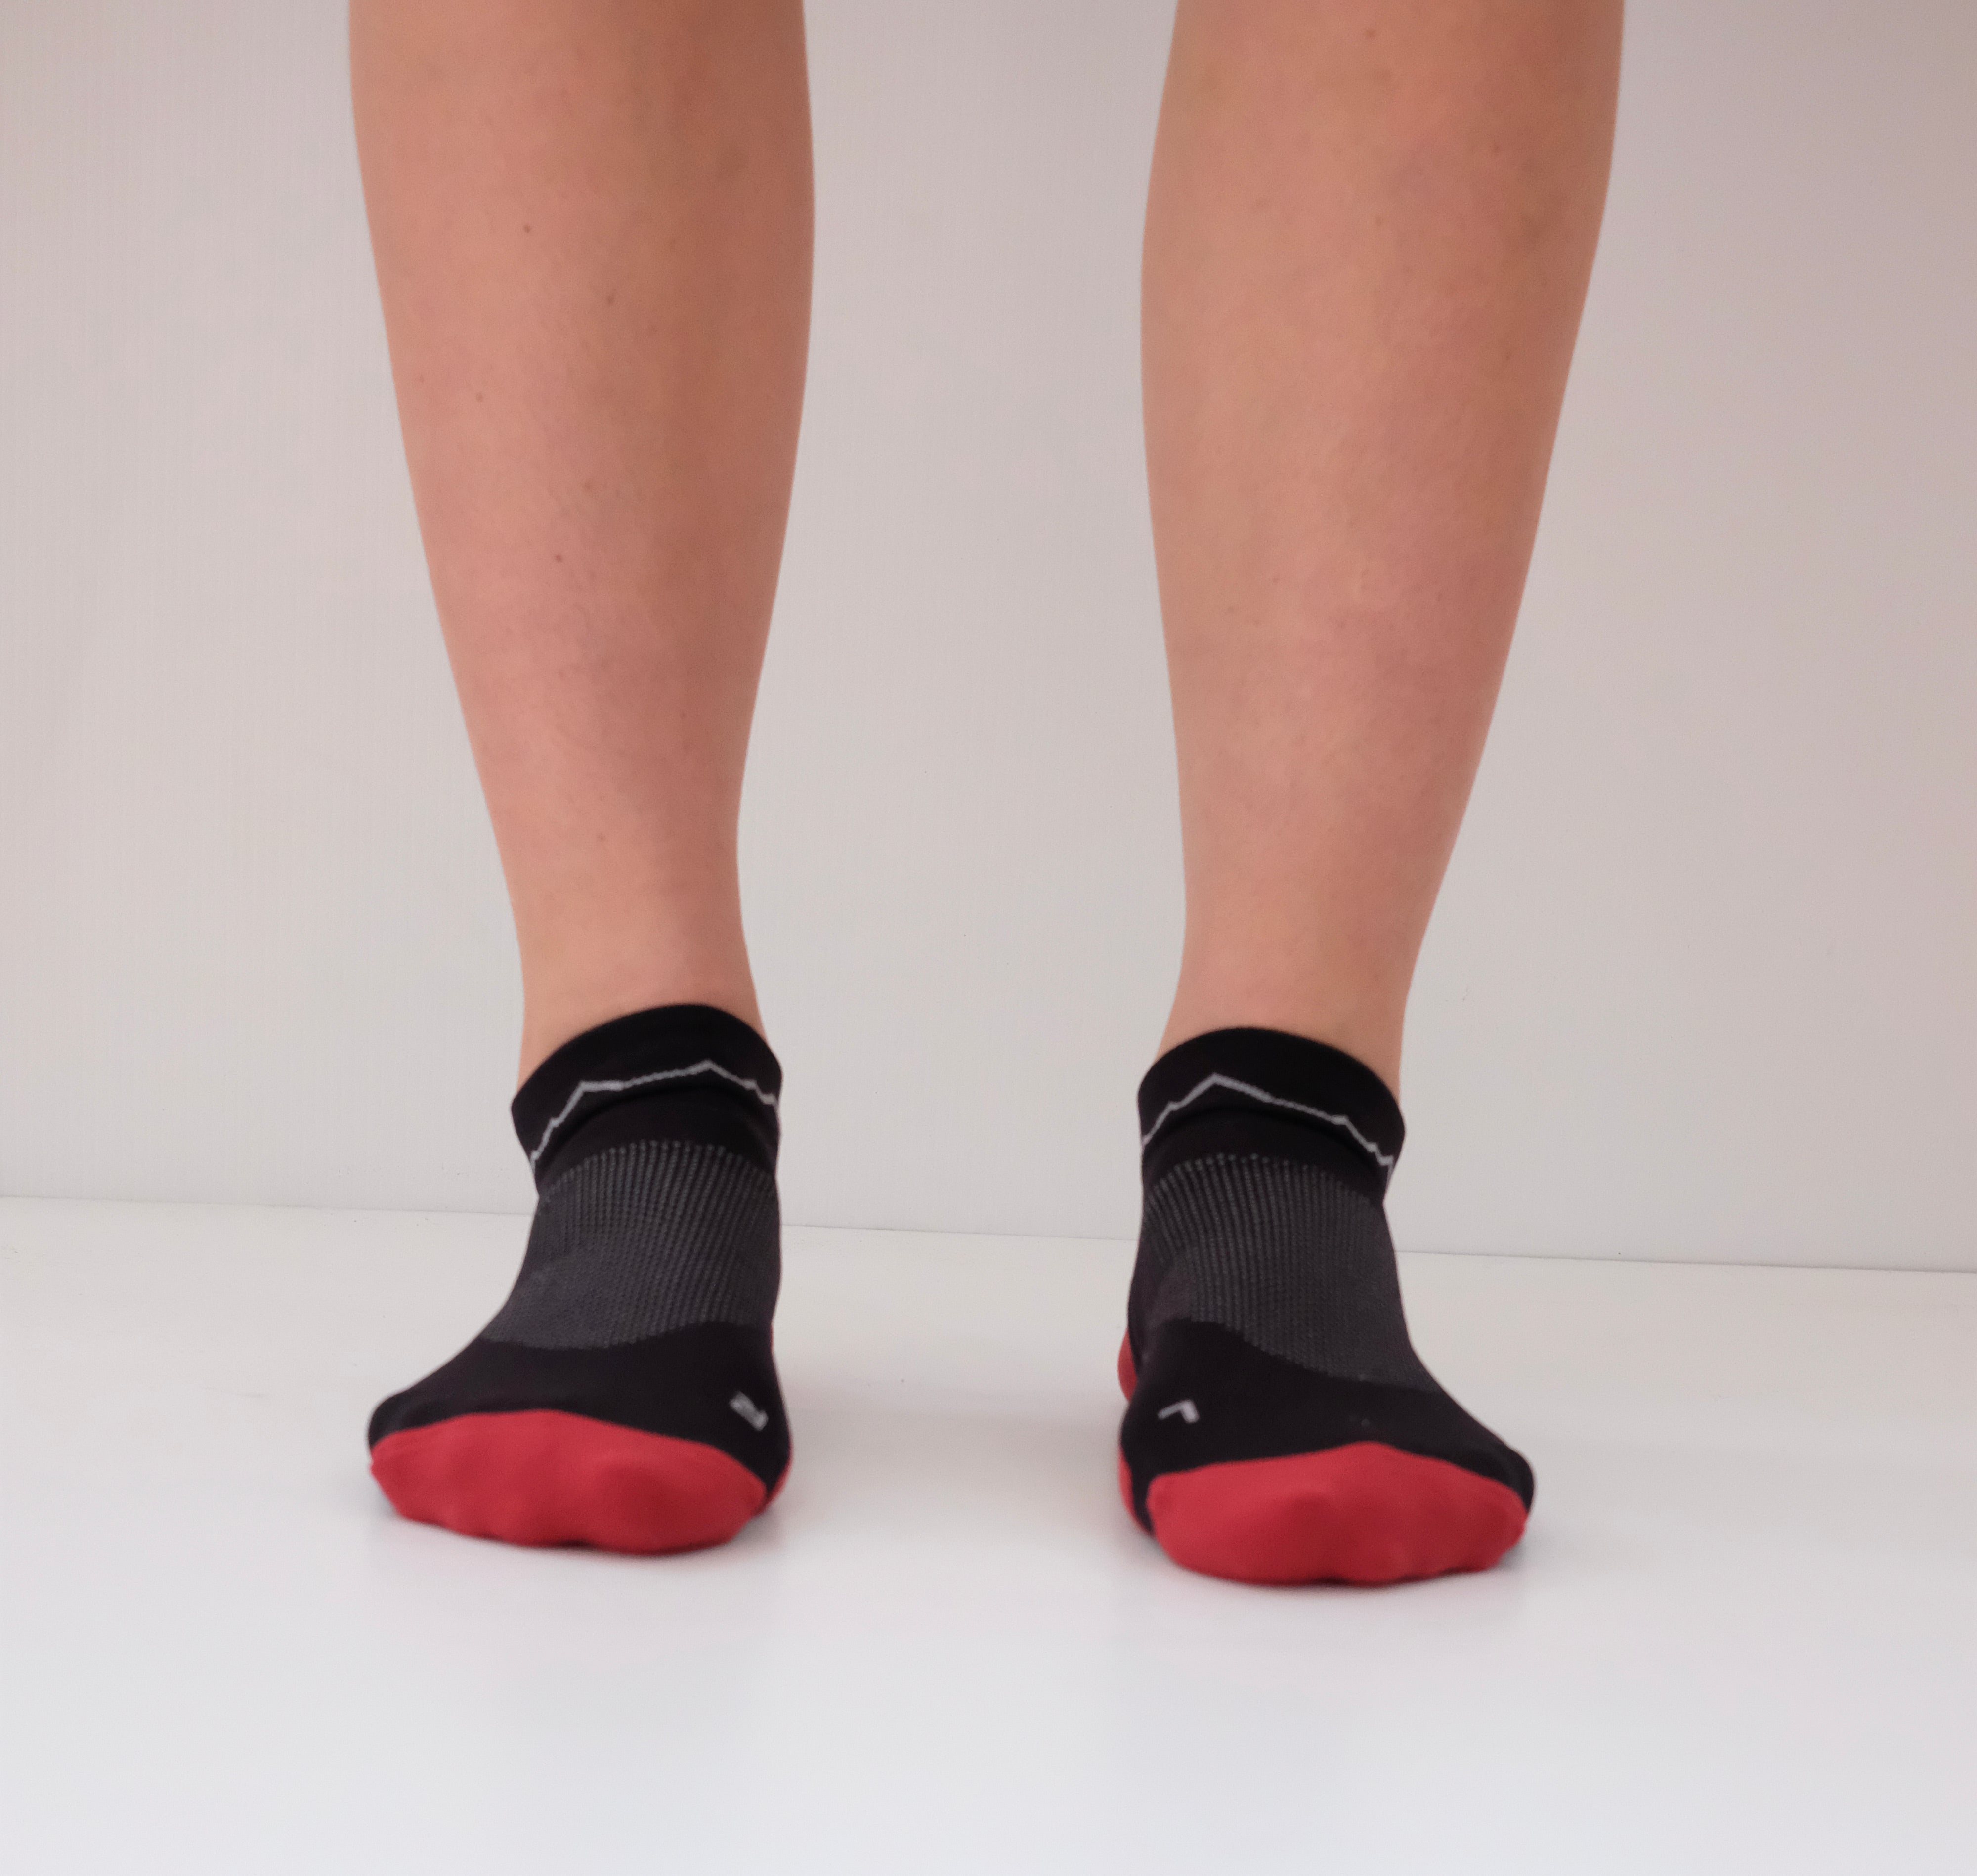 Find Your Feet Micro Socks (Unisex) - Find Your Feet